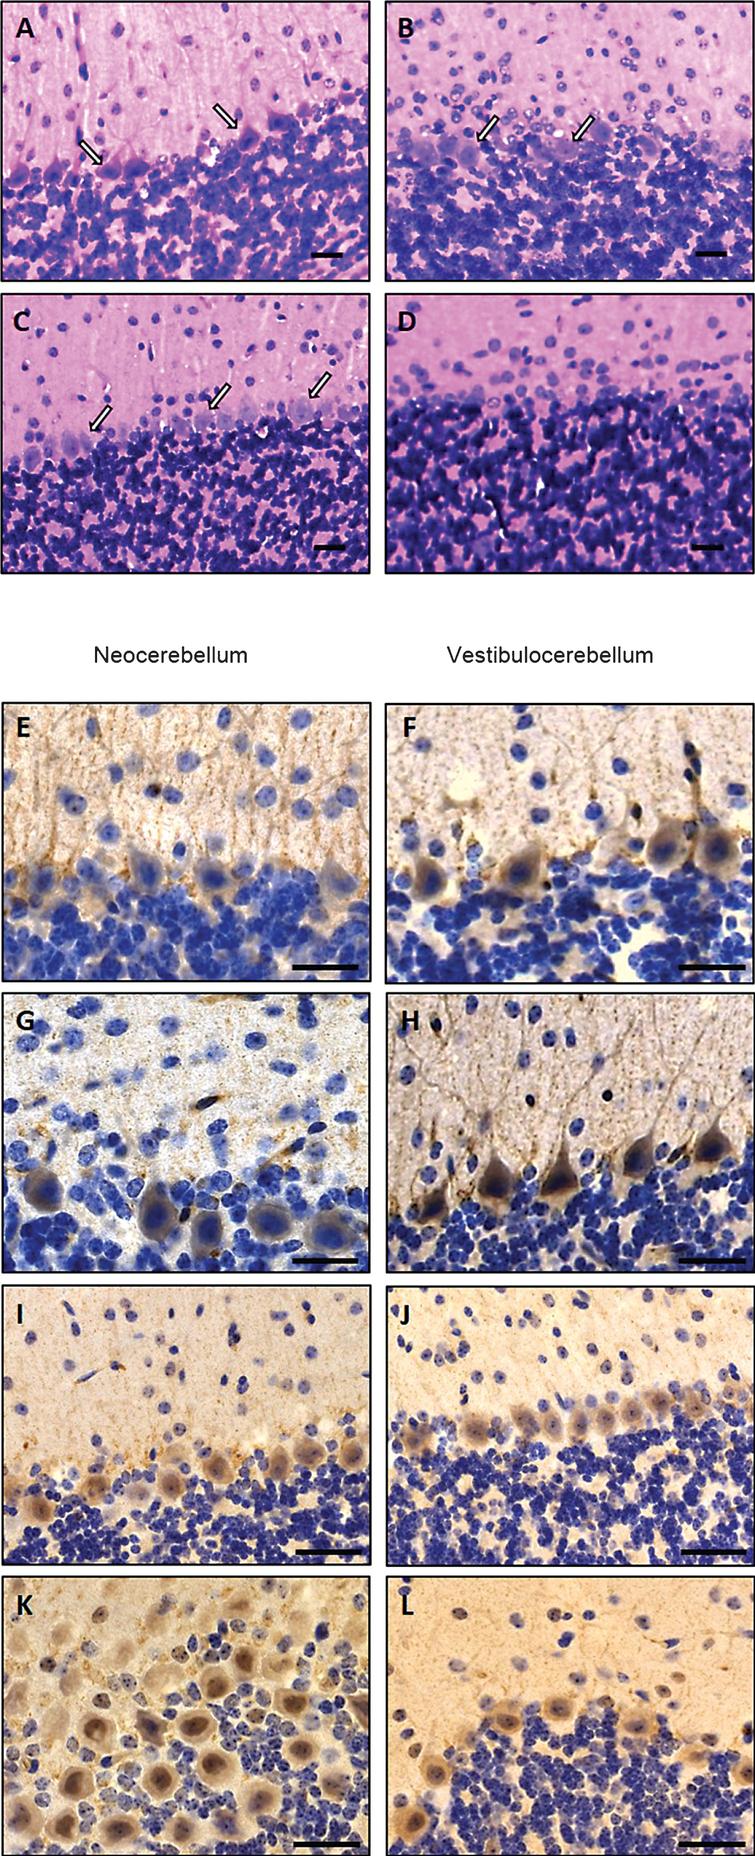 Cerebellar alterations in woozy mice. H&E: (A) Purkinje cell layer (white arrows) and absence of glial cell proliferation in a 6-week-old wild type littermate control. Scale bar = 20 μm. (B) Occasional mislocalisation of Purkinje-cells (white arrows) and proliferated (Bergmann) glial cells in a 6-week-old woozy mouse. Scale bar = 20 μm. (C) Purkinje-cell layer (white arrows) and absence of glial cell proliferation in a 26-week-old wild type littermate control. Scale bar = 20 μm. (D) Complete loss of Purkinje cells in a 26-week-old woozy animal. Scale bar = 15 μm. Immunohistochemistry: (E–L) Purkinje cells in the neo- and vestibulocerebellum of 6 weeks (E, G, I and K) and 26 weeks (F, H, J and L) old wildtype animals show enrichment of BCL2 in dendrites (E–H). Sil1-mutant Purkinje cells show decreased immunoreactivity in the neocerebellum (degenerating cells, G), but increased reactivity in Purkinje cells of the non-vulnerable vestibulocerebellum (surviving cells, H). (I–L) Investigation of PARP1 in Purkinje cells of woozy revealed increased immunoreactivity in the nuclei of neocerebellar Purkinje cells (K) but not in vestibulocerebellar Purkinje cells (L) compared to wildtype animals (I, J).